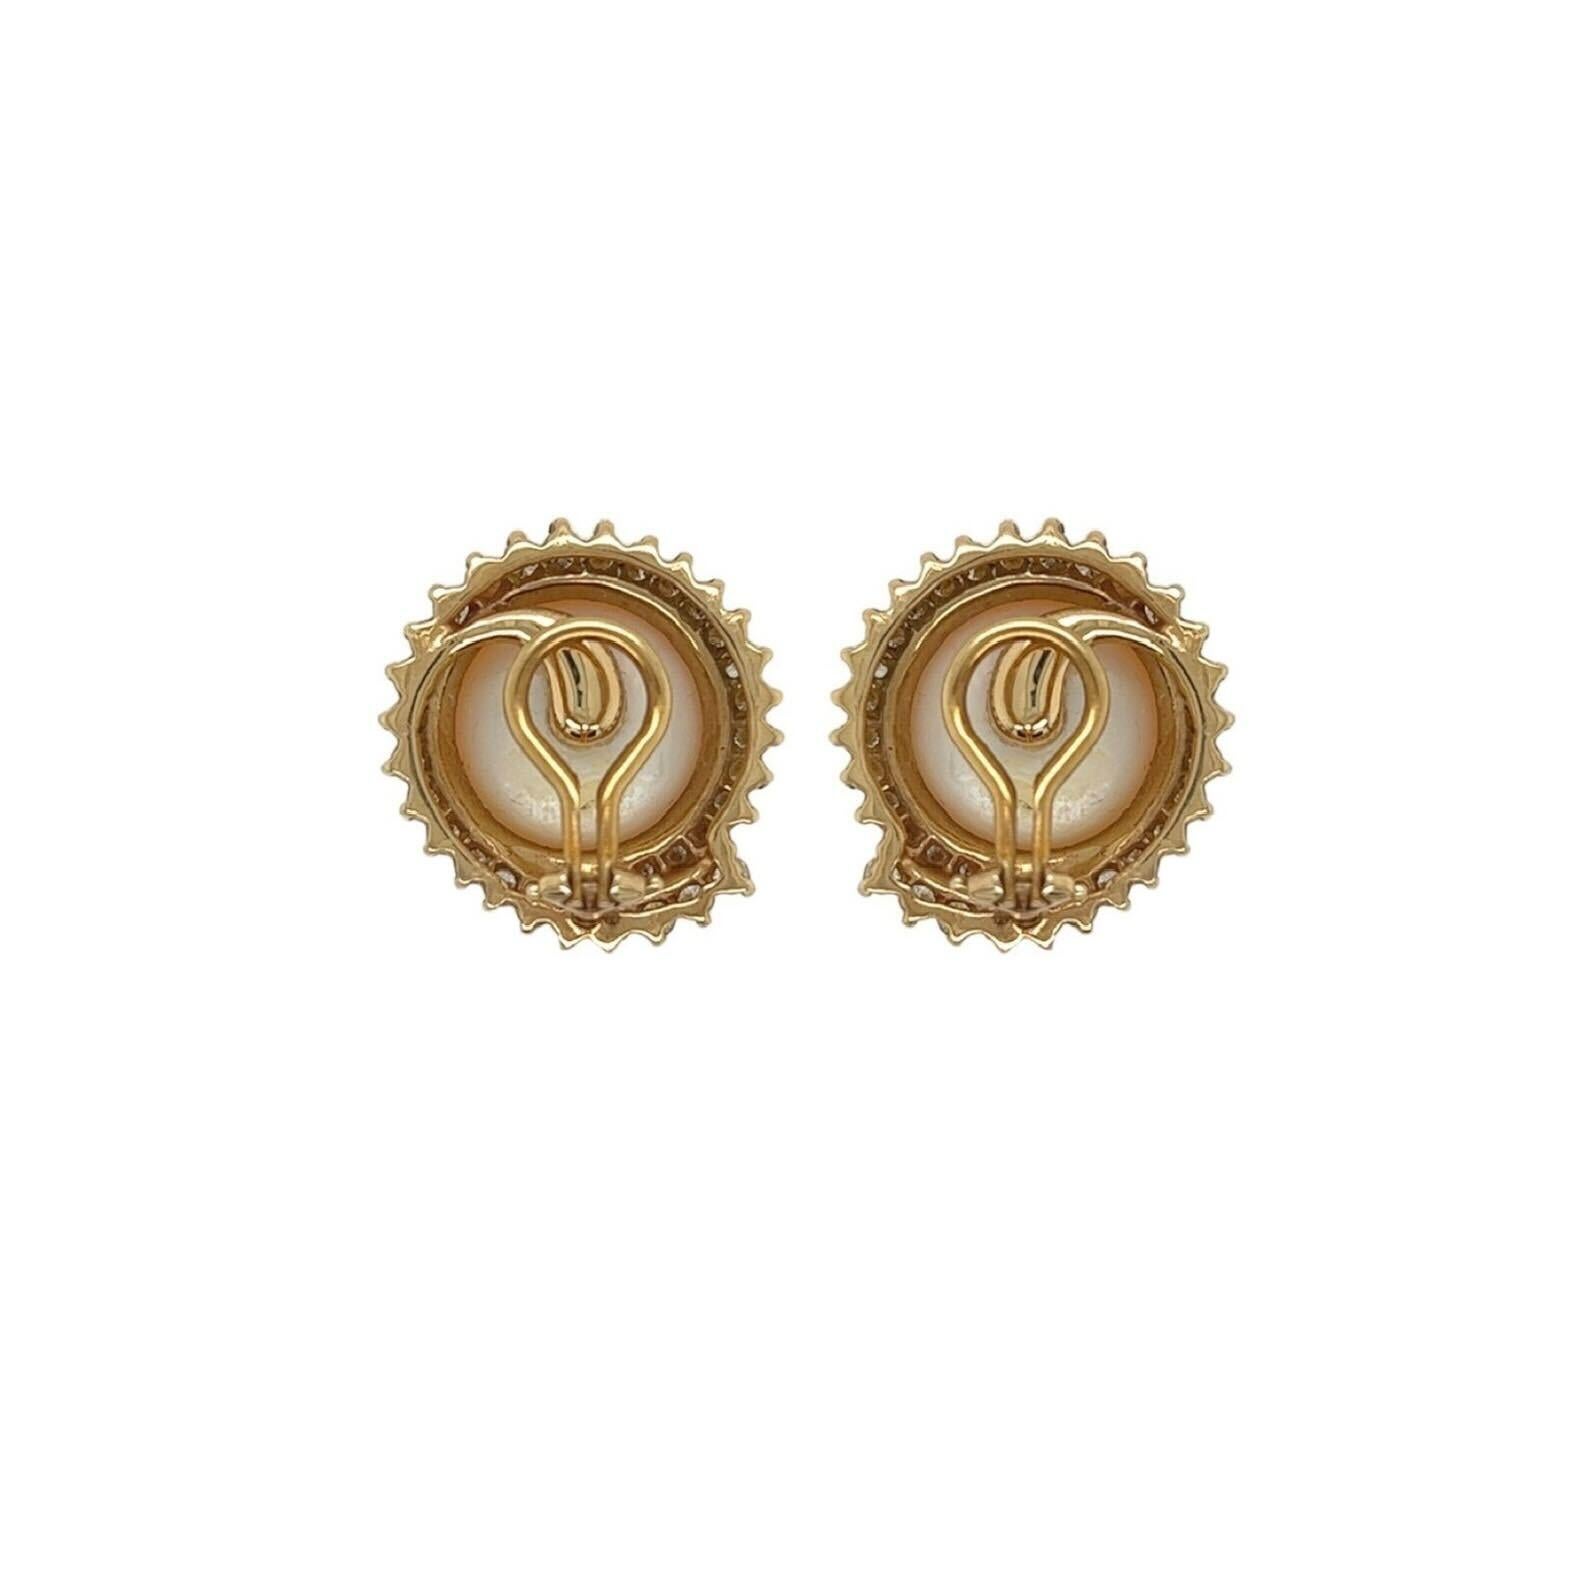 A pair of 14 karat yellow gold, pearl and diamond earclips.  Each earclip designed as a central mabe pearl measuring approximately 13.4 mm surrounded by a spiral of approximately thirty two (32) round brilliant cut diamonds.  Total diamond weight